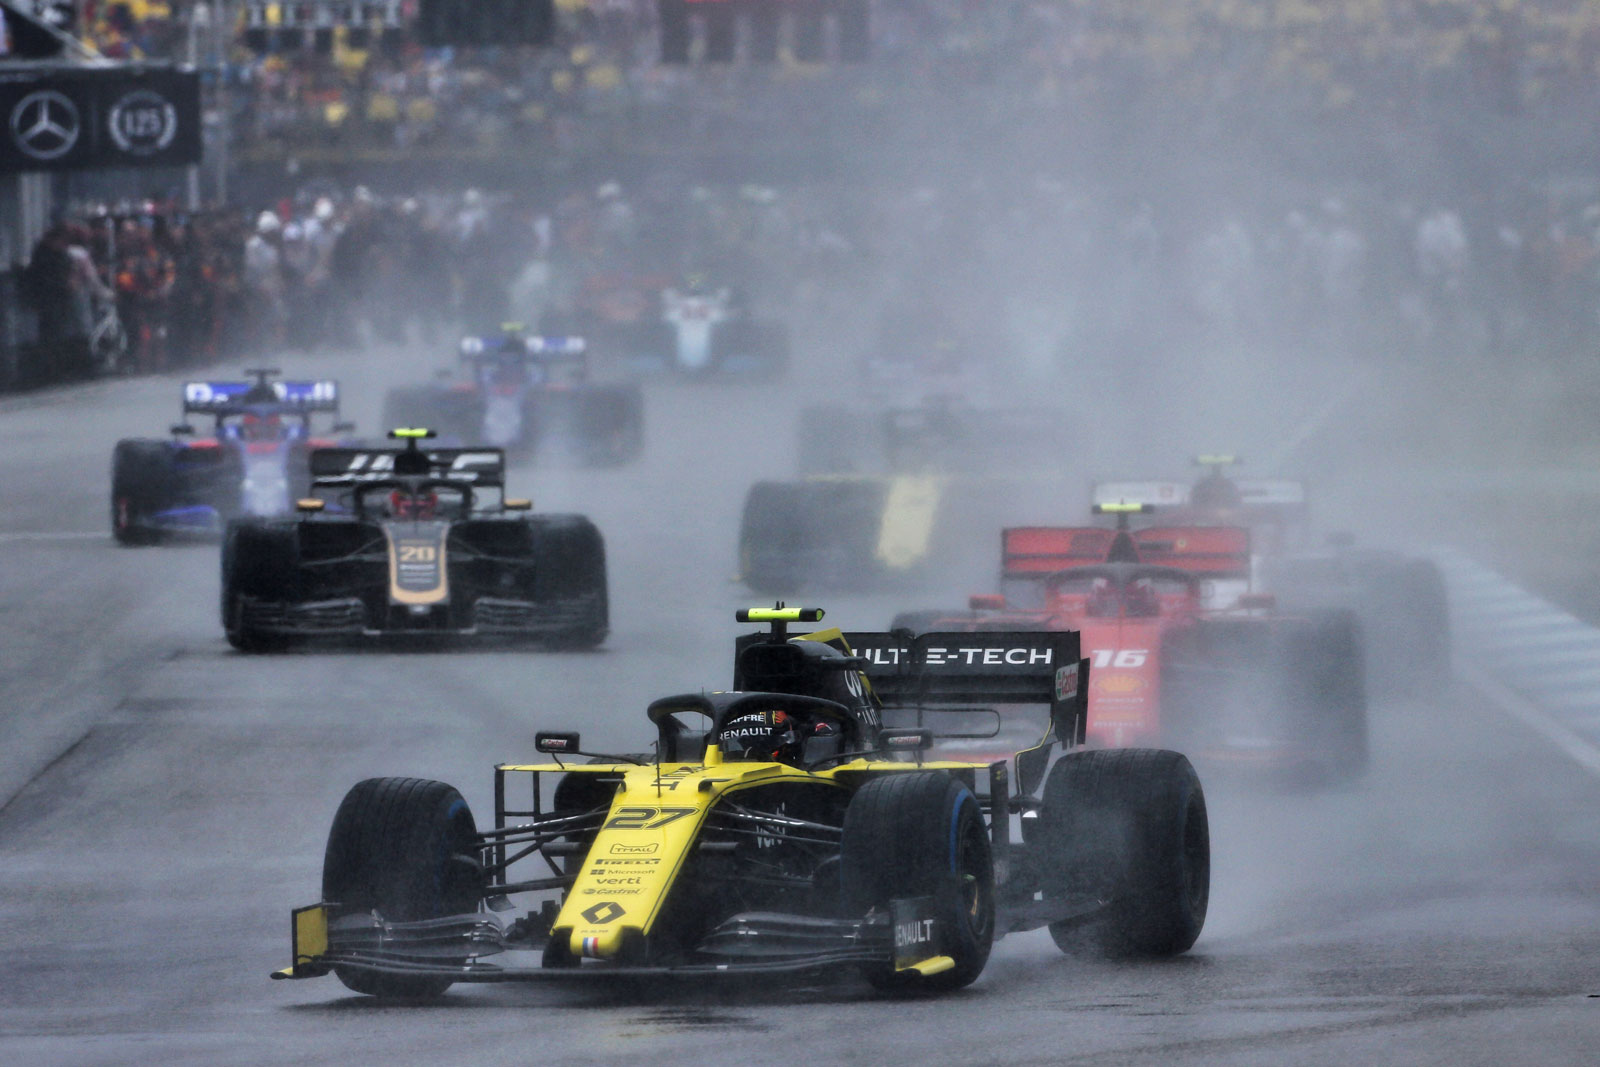 A yellow Renault car in the foreground leads multiple other Formula 1 cars in a rainy race